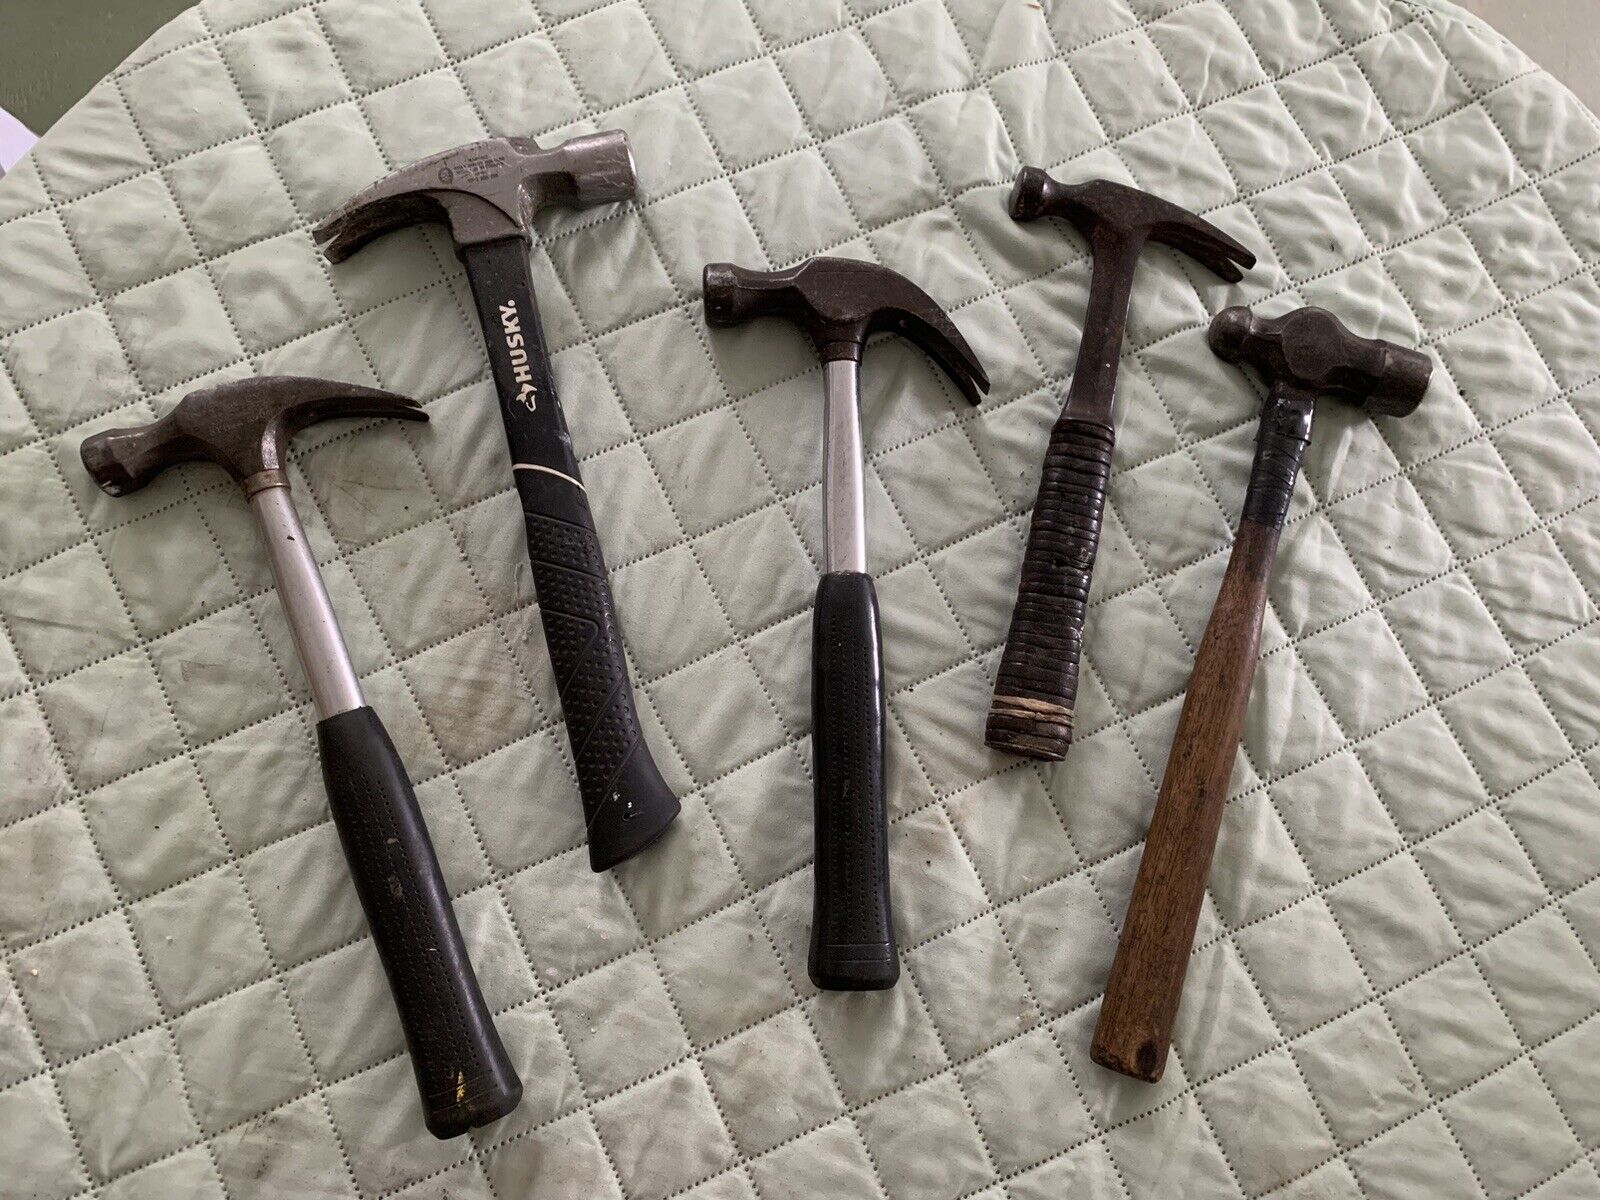 Lot of 5 great  Vintage HAMMERS - Stanley, Husky, Bunne - Good Used Condition